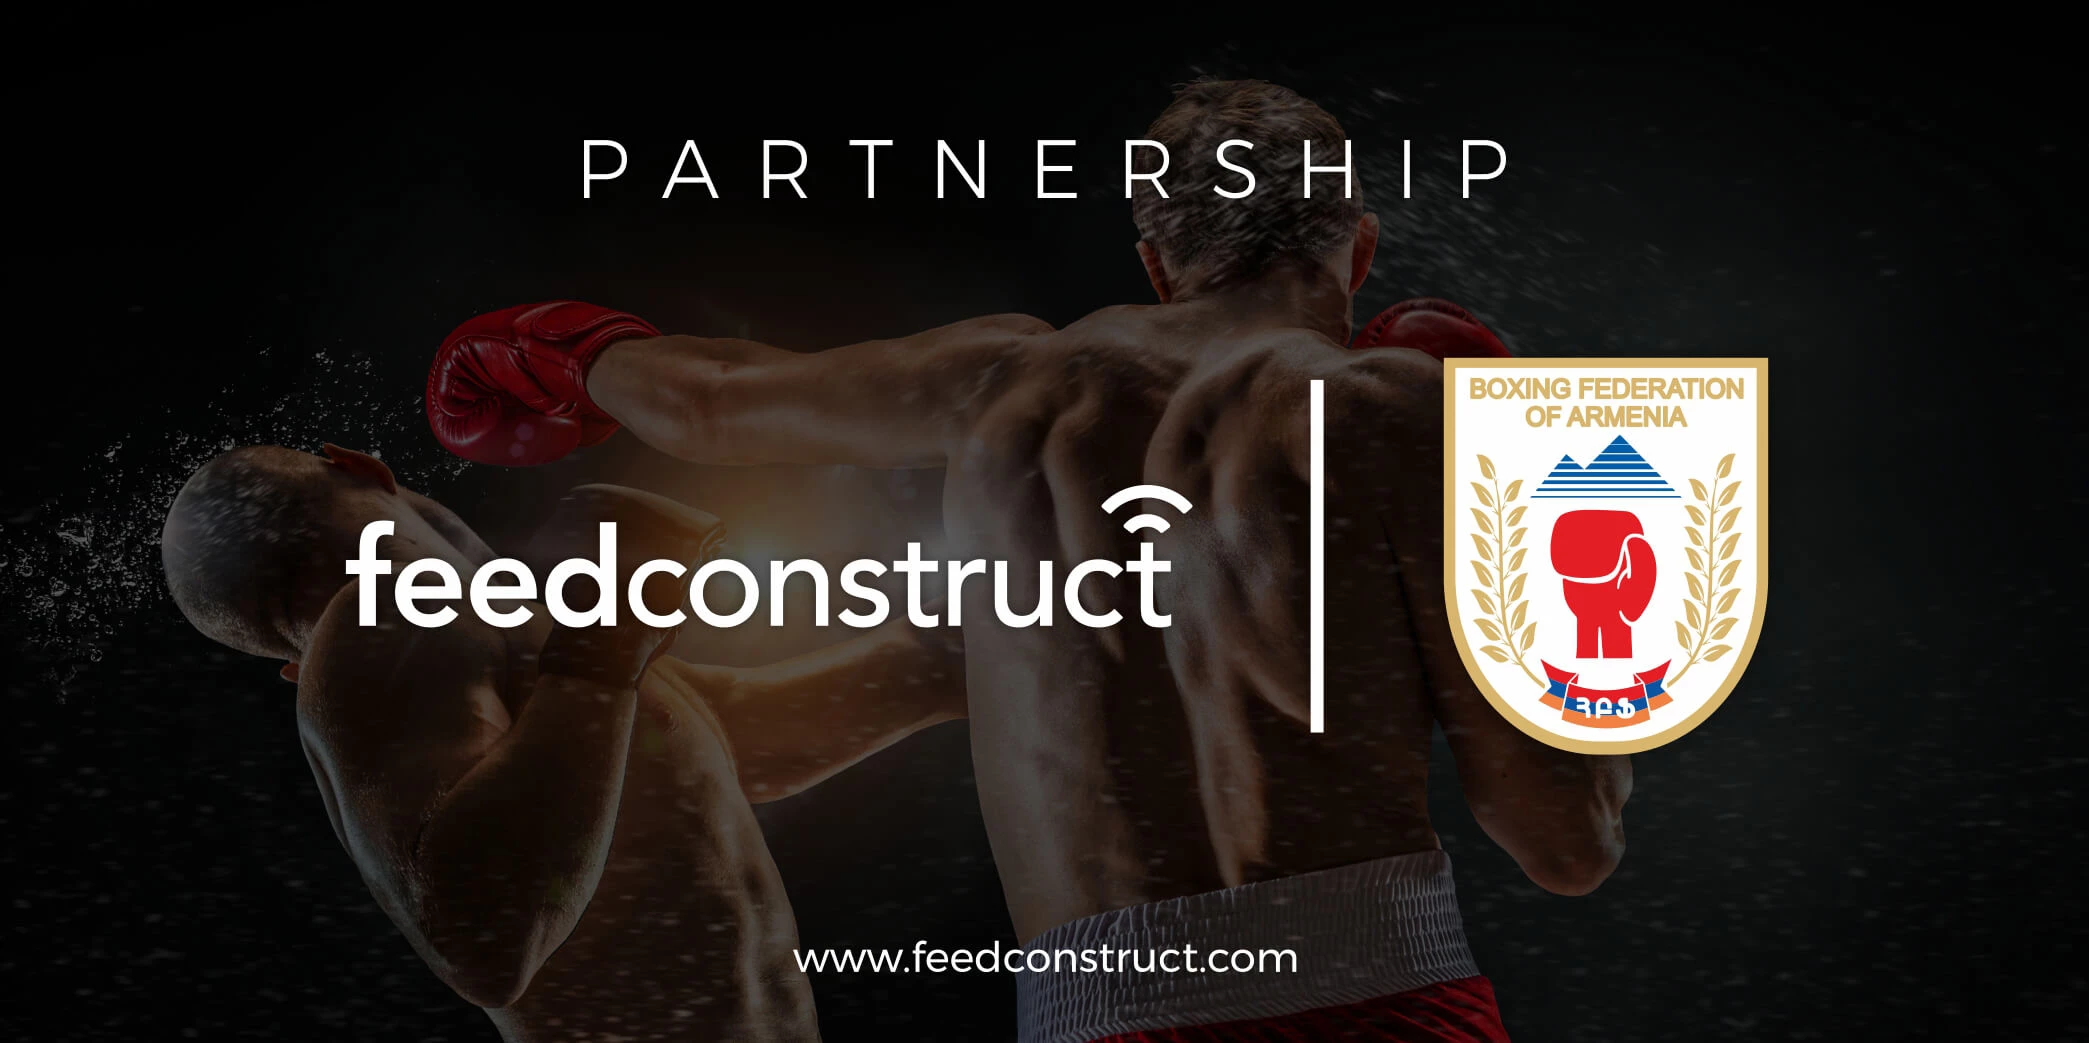 FeedConstruct welcomes the Boxing Federation of Armenia as an exclusive partner